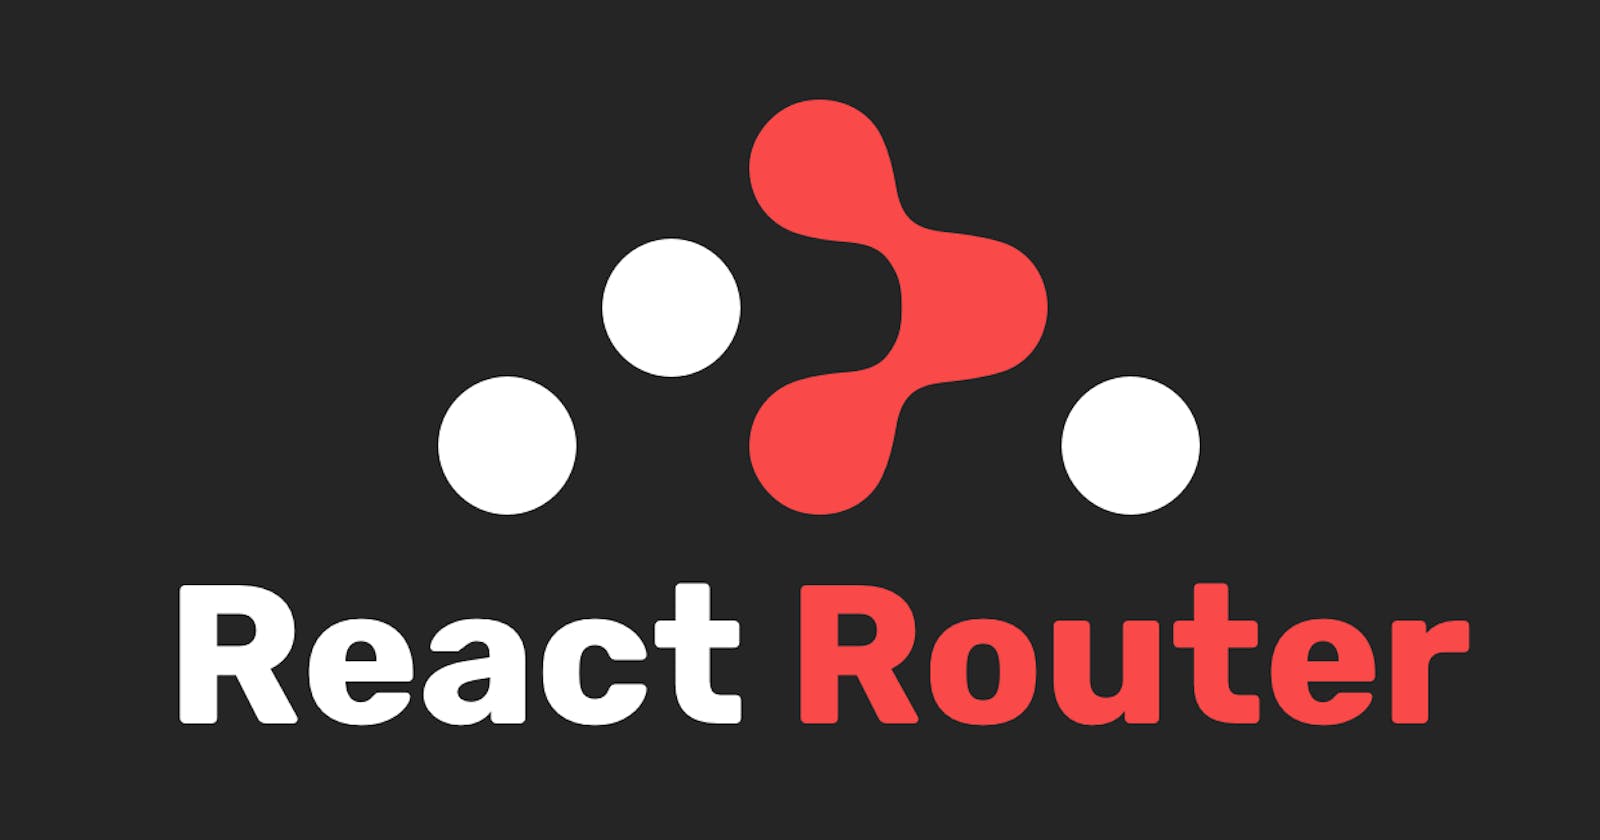 Routing in SPA using React Router